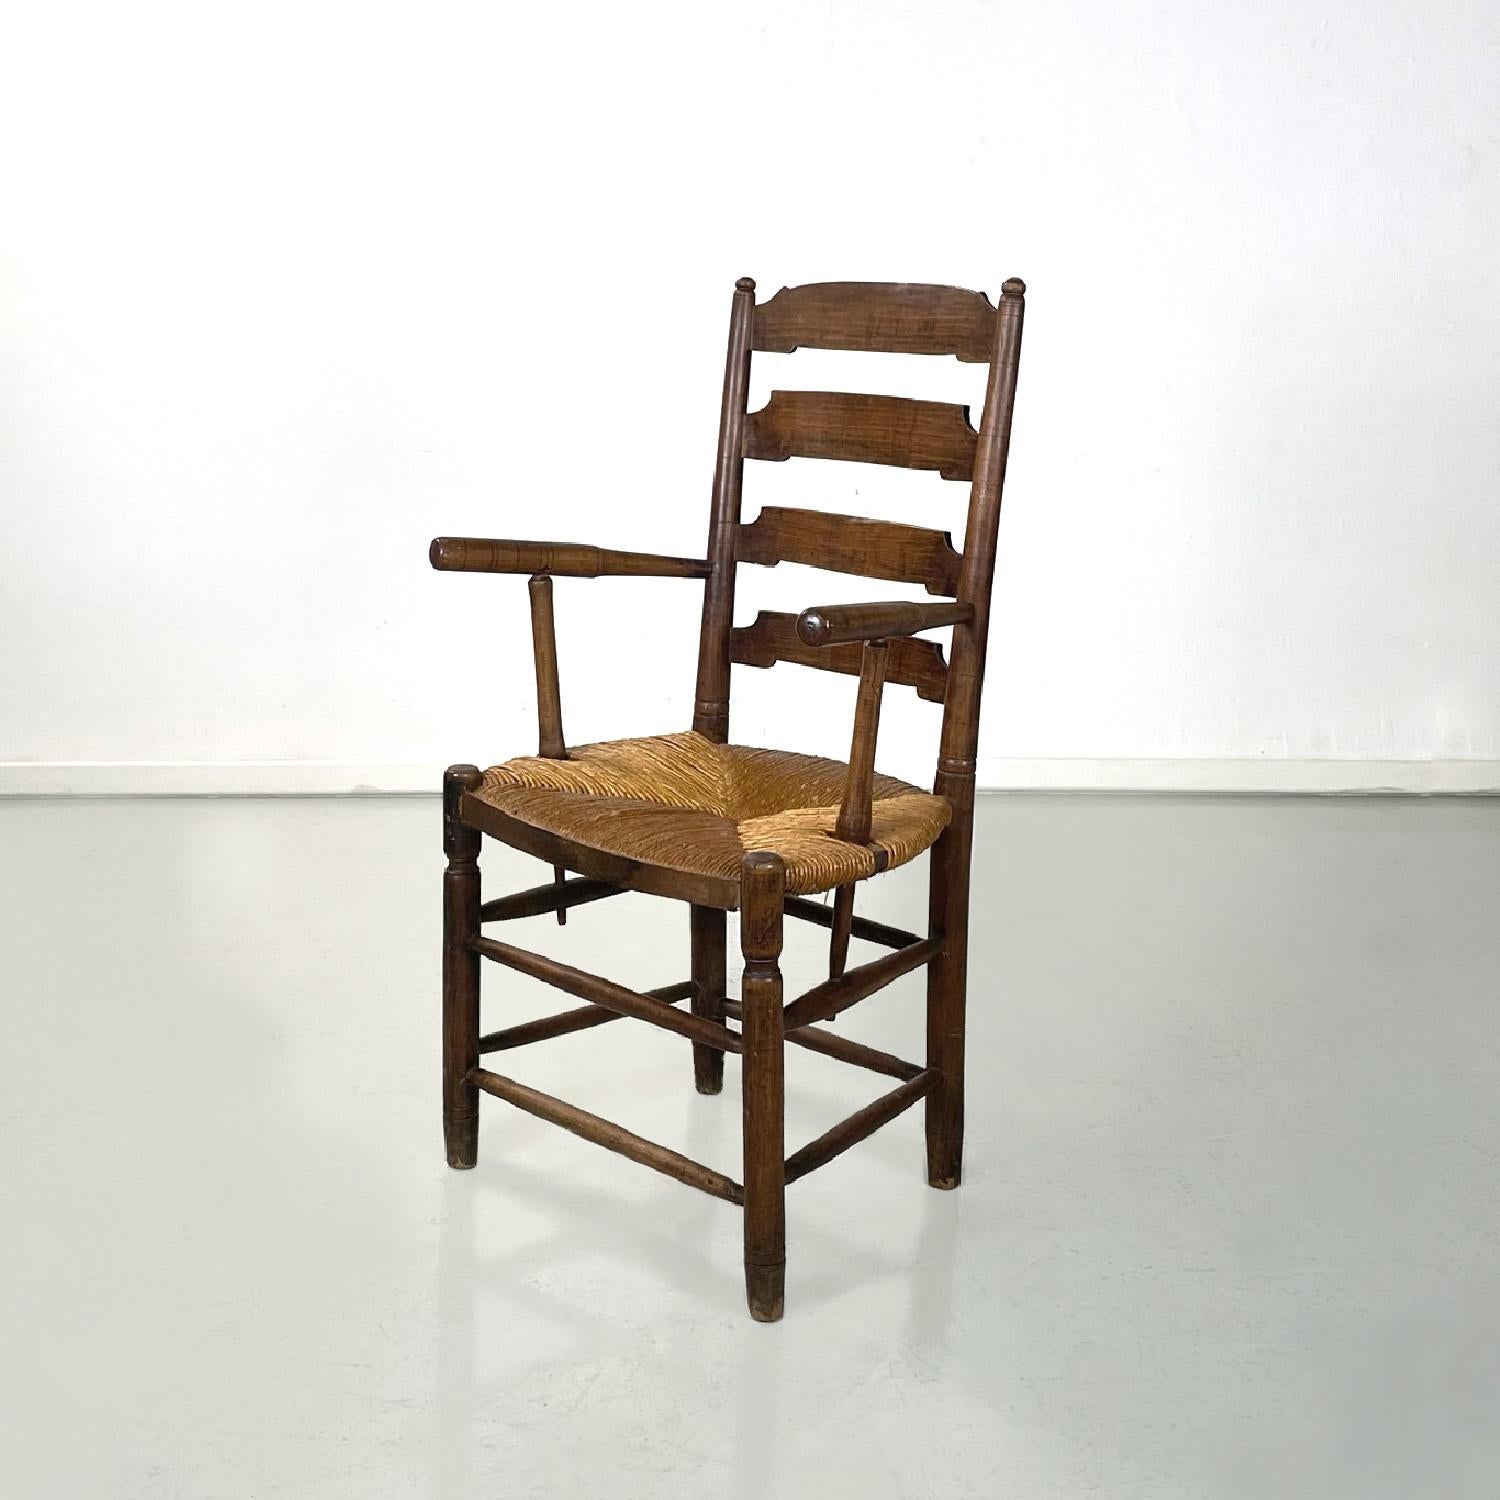 French antique wood oak and straw chair with armrests decorations, late 1800s
French chair with armrests. The structure is in oak and the seat is in straw. The backrest is high and has four shaped support strips, there are decorations on the legs